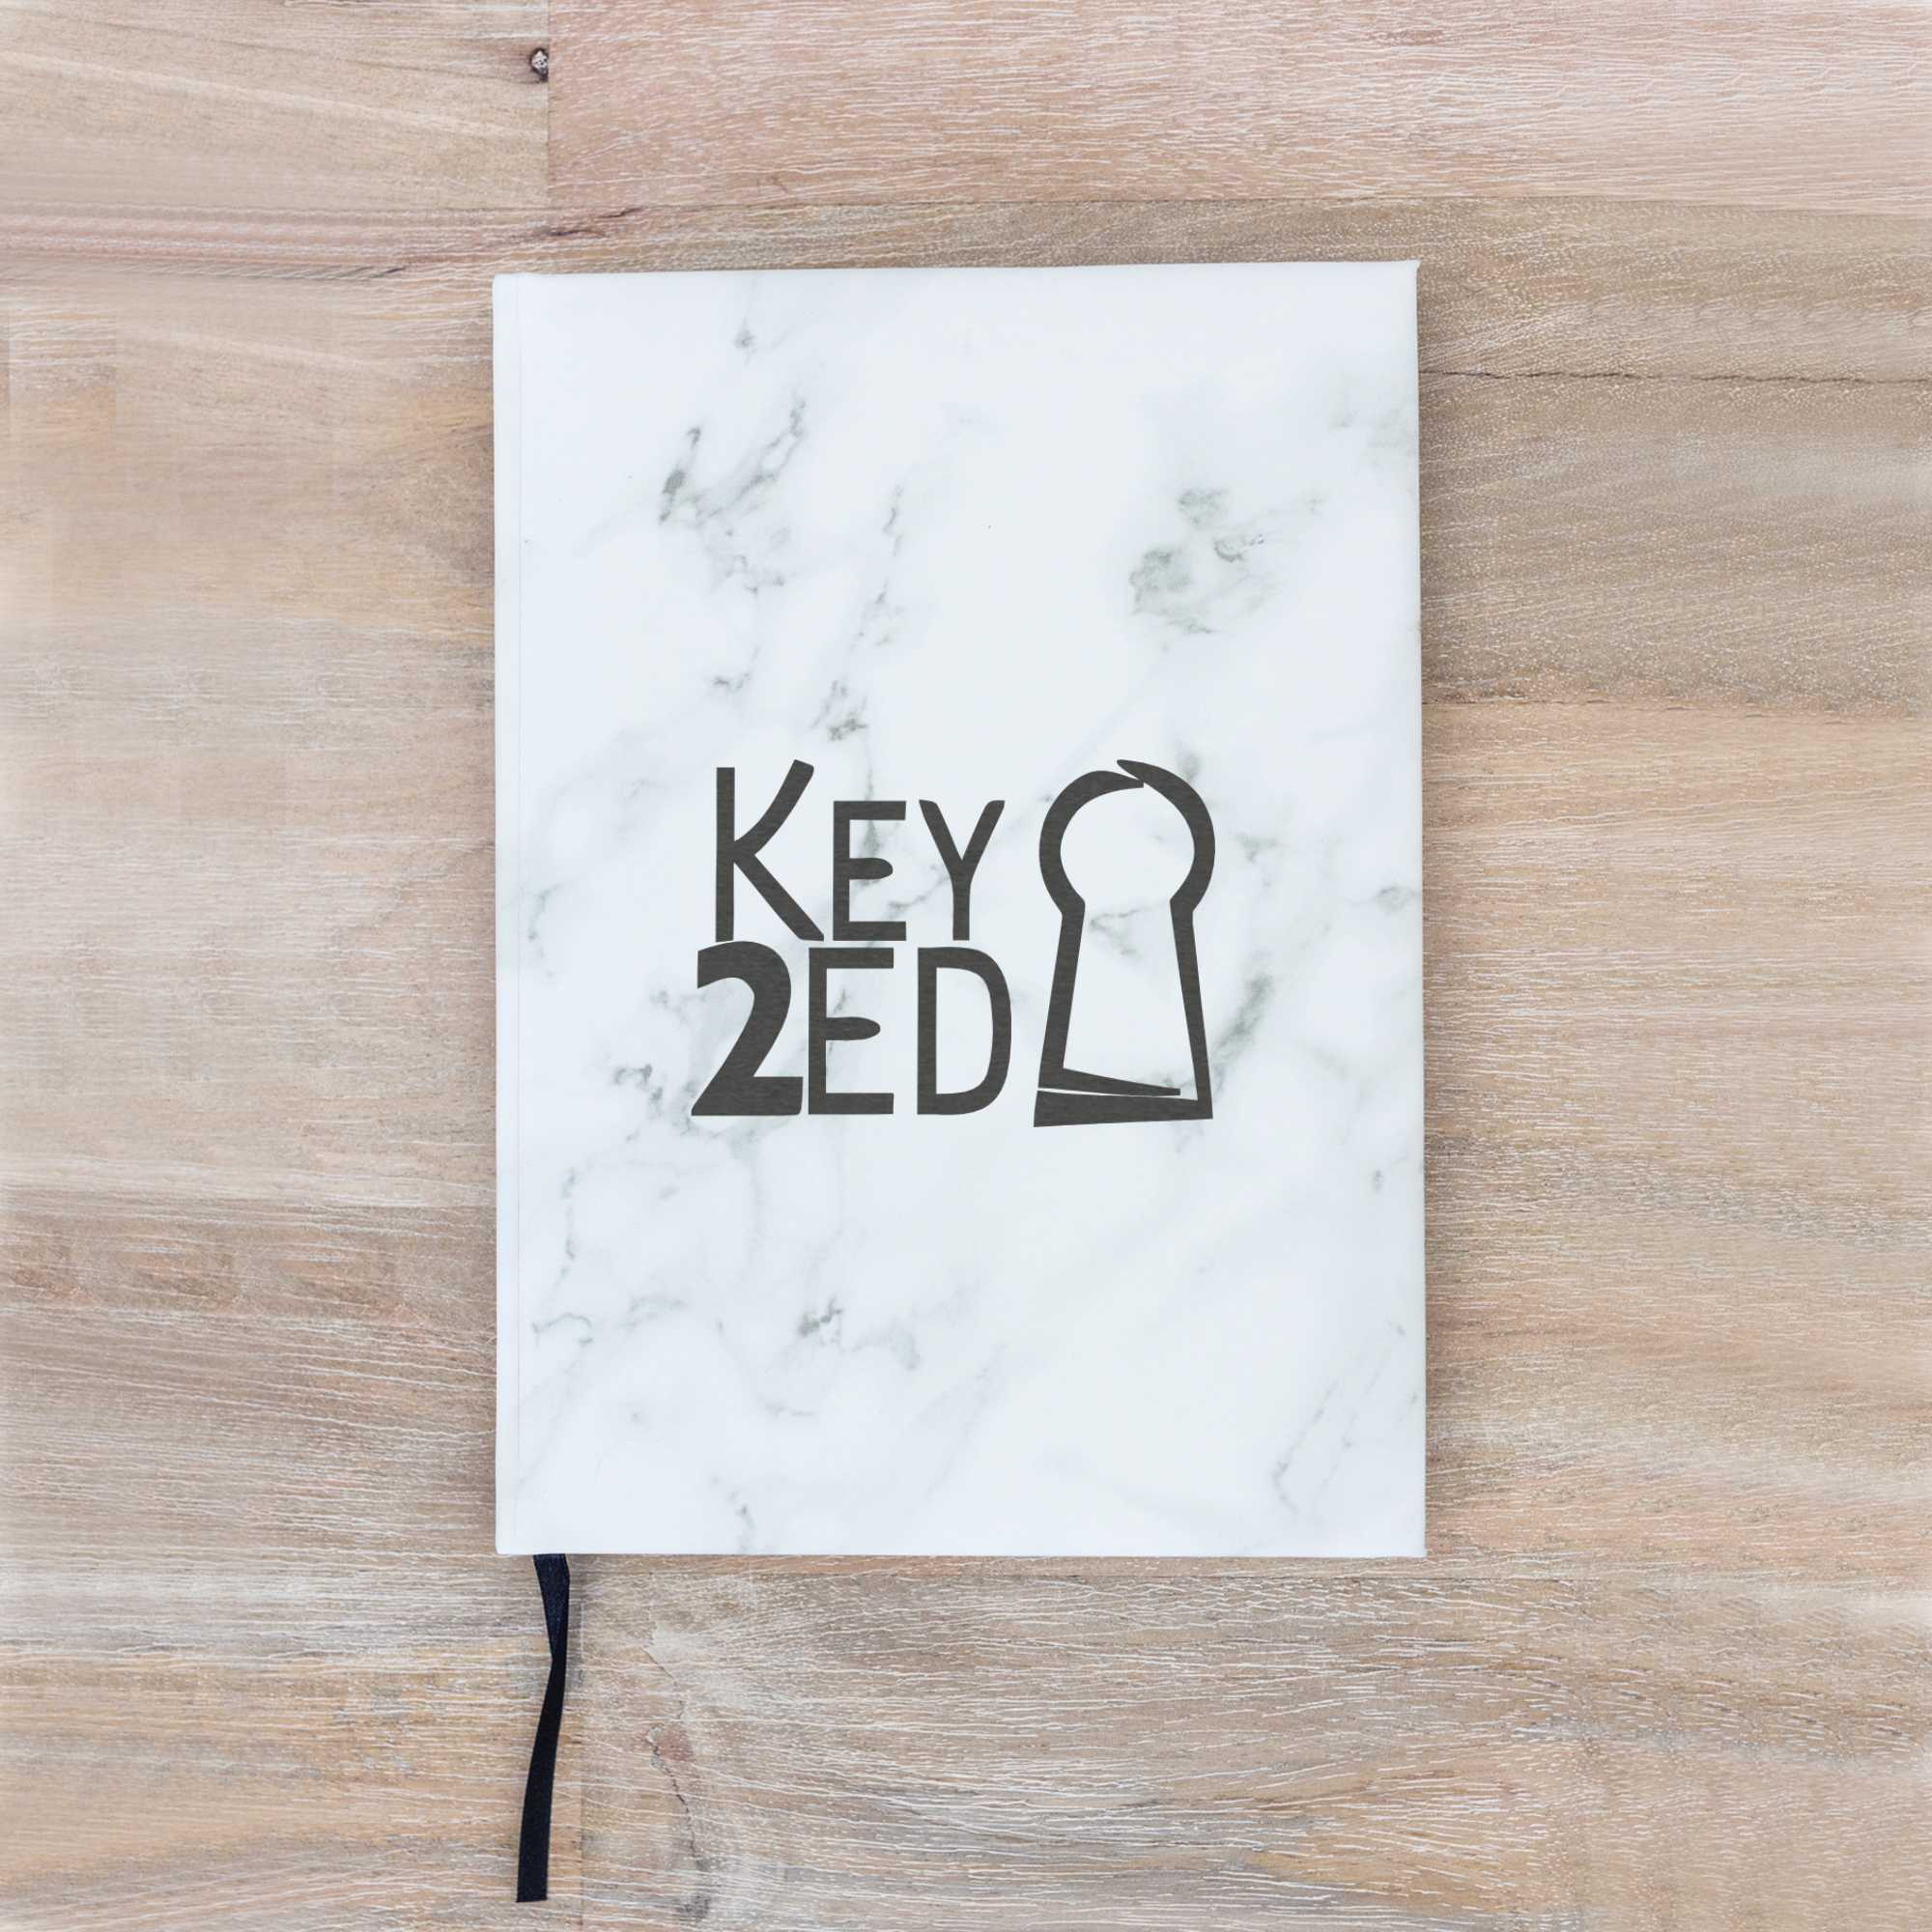 Blank Journal with Business Logo